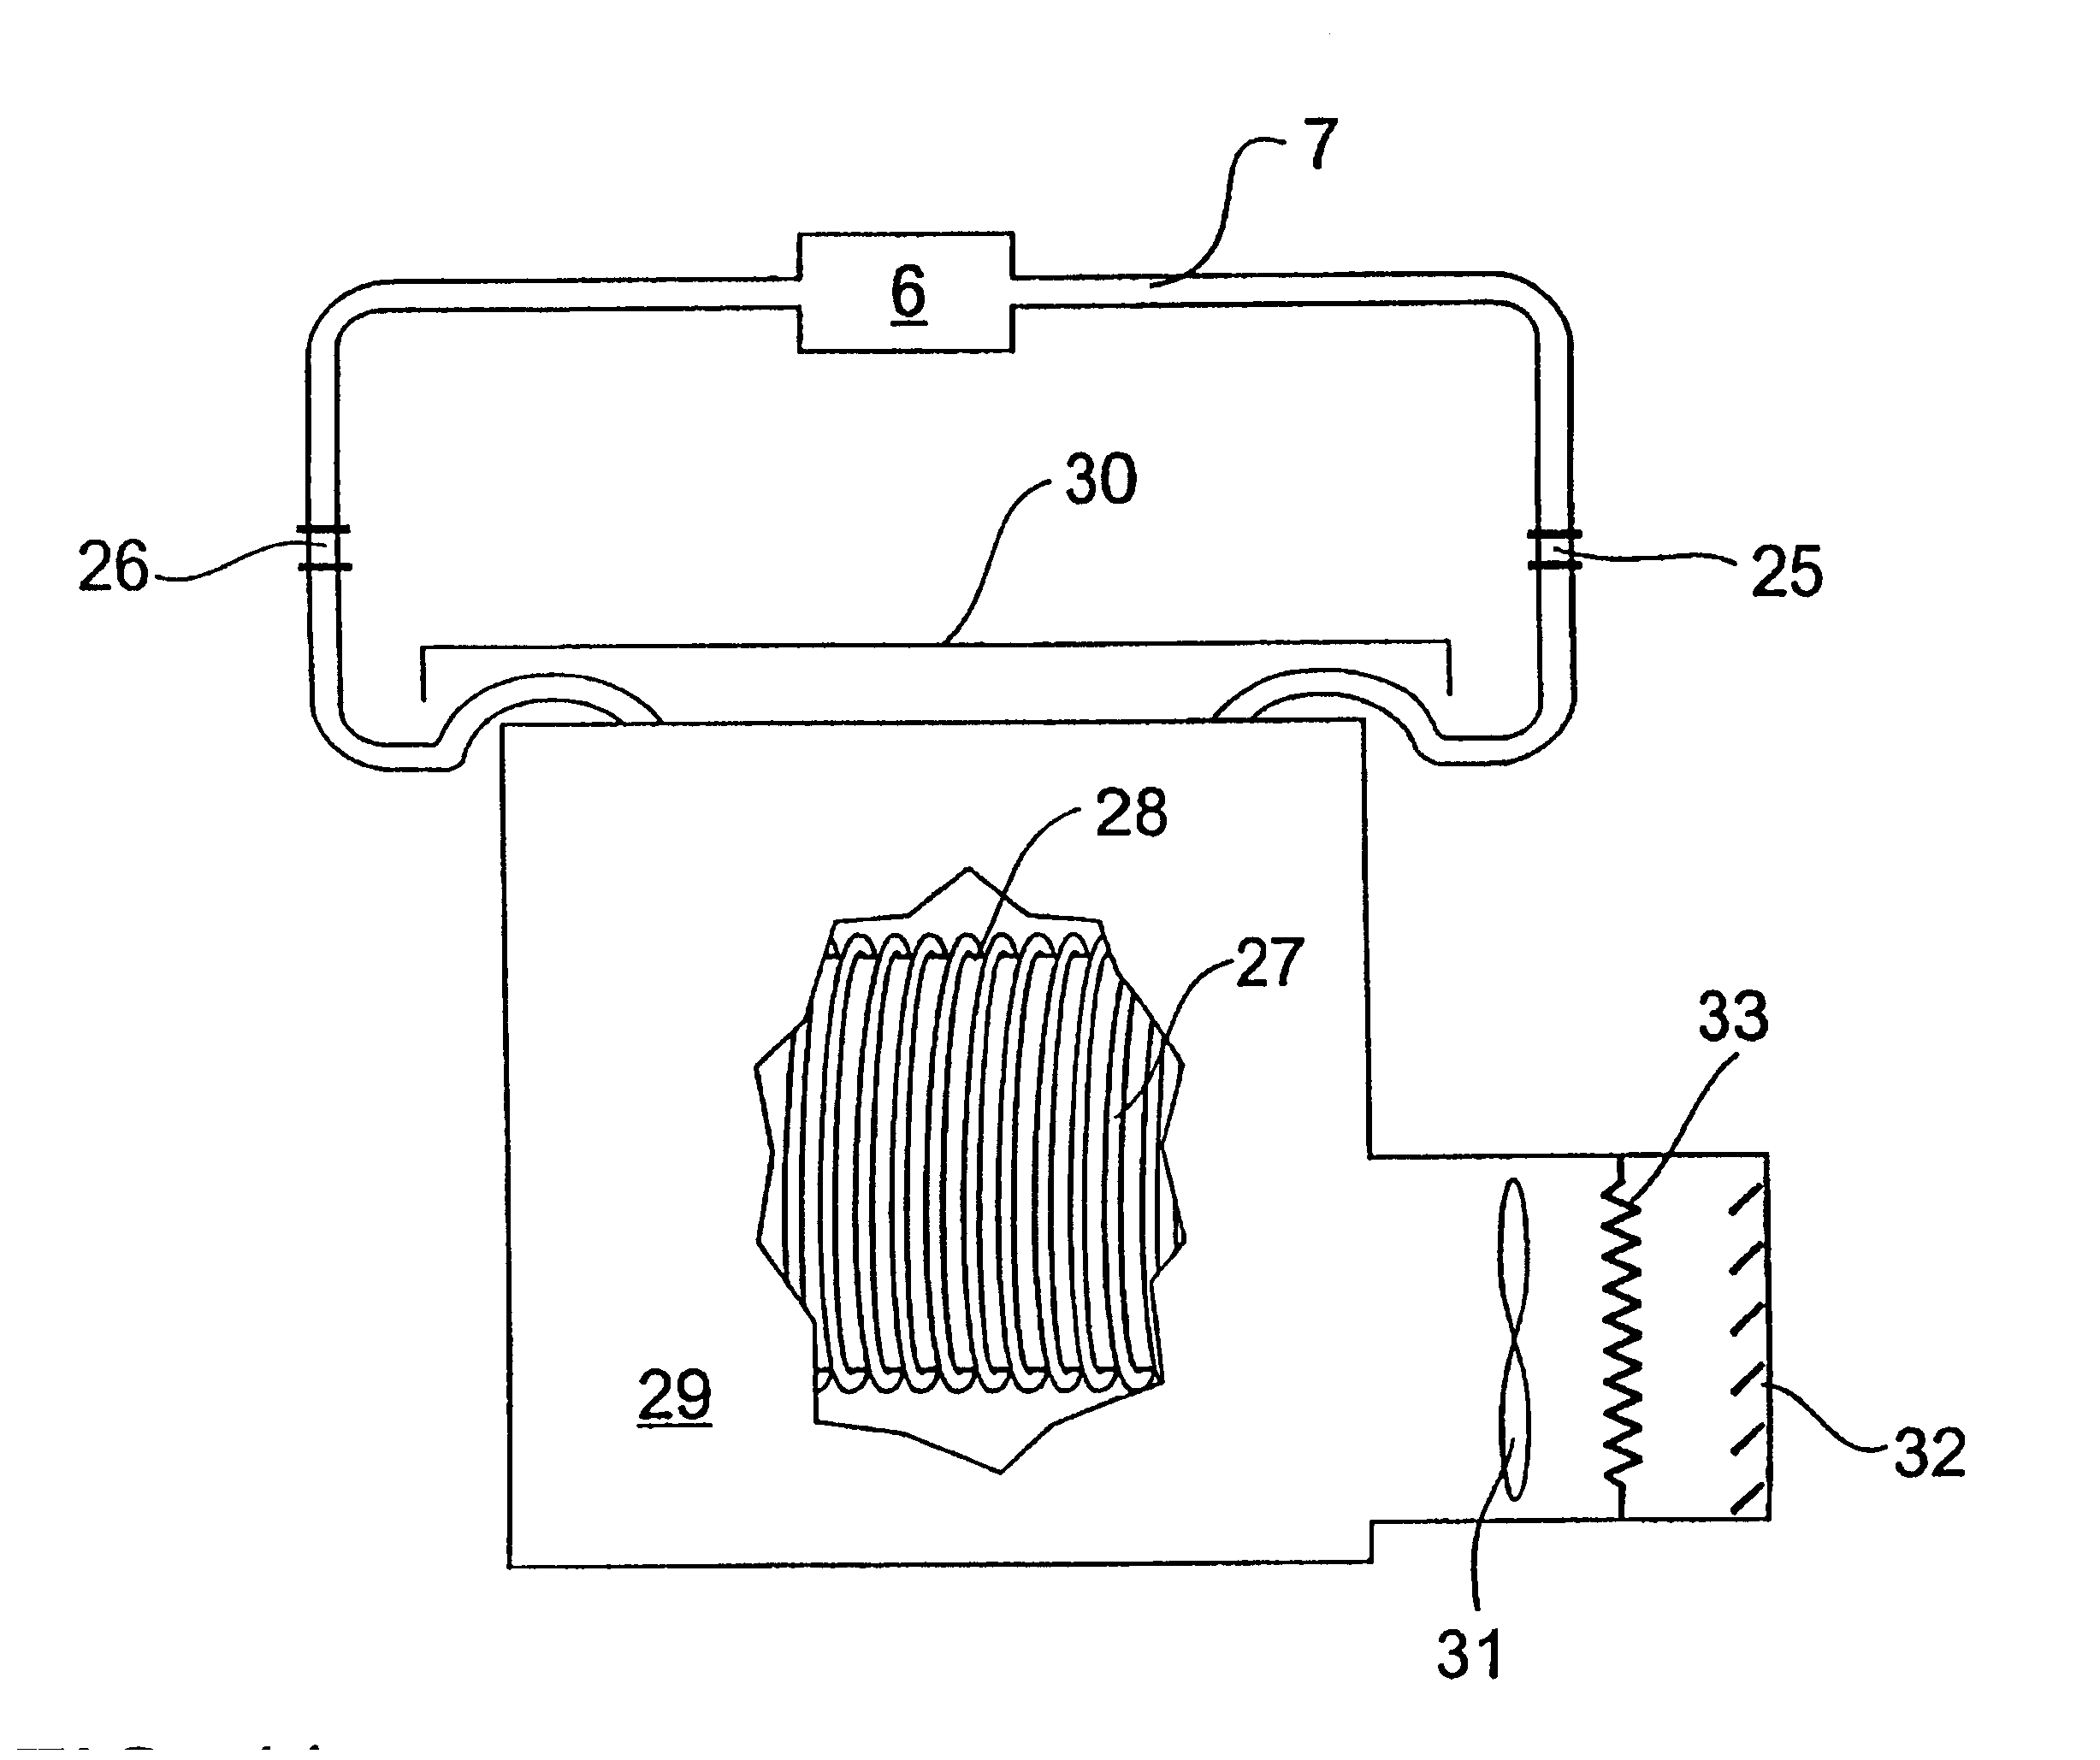 Method of manufacturing a light guide